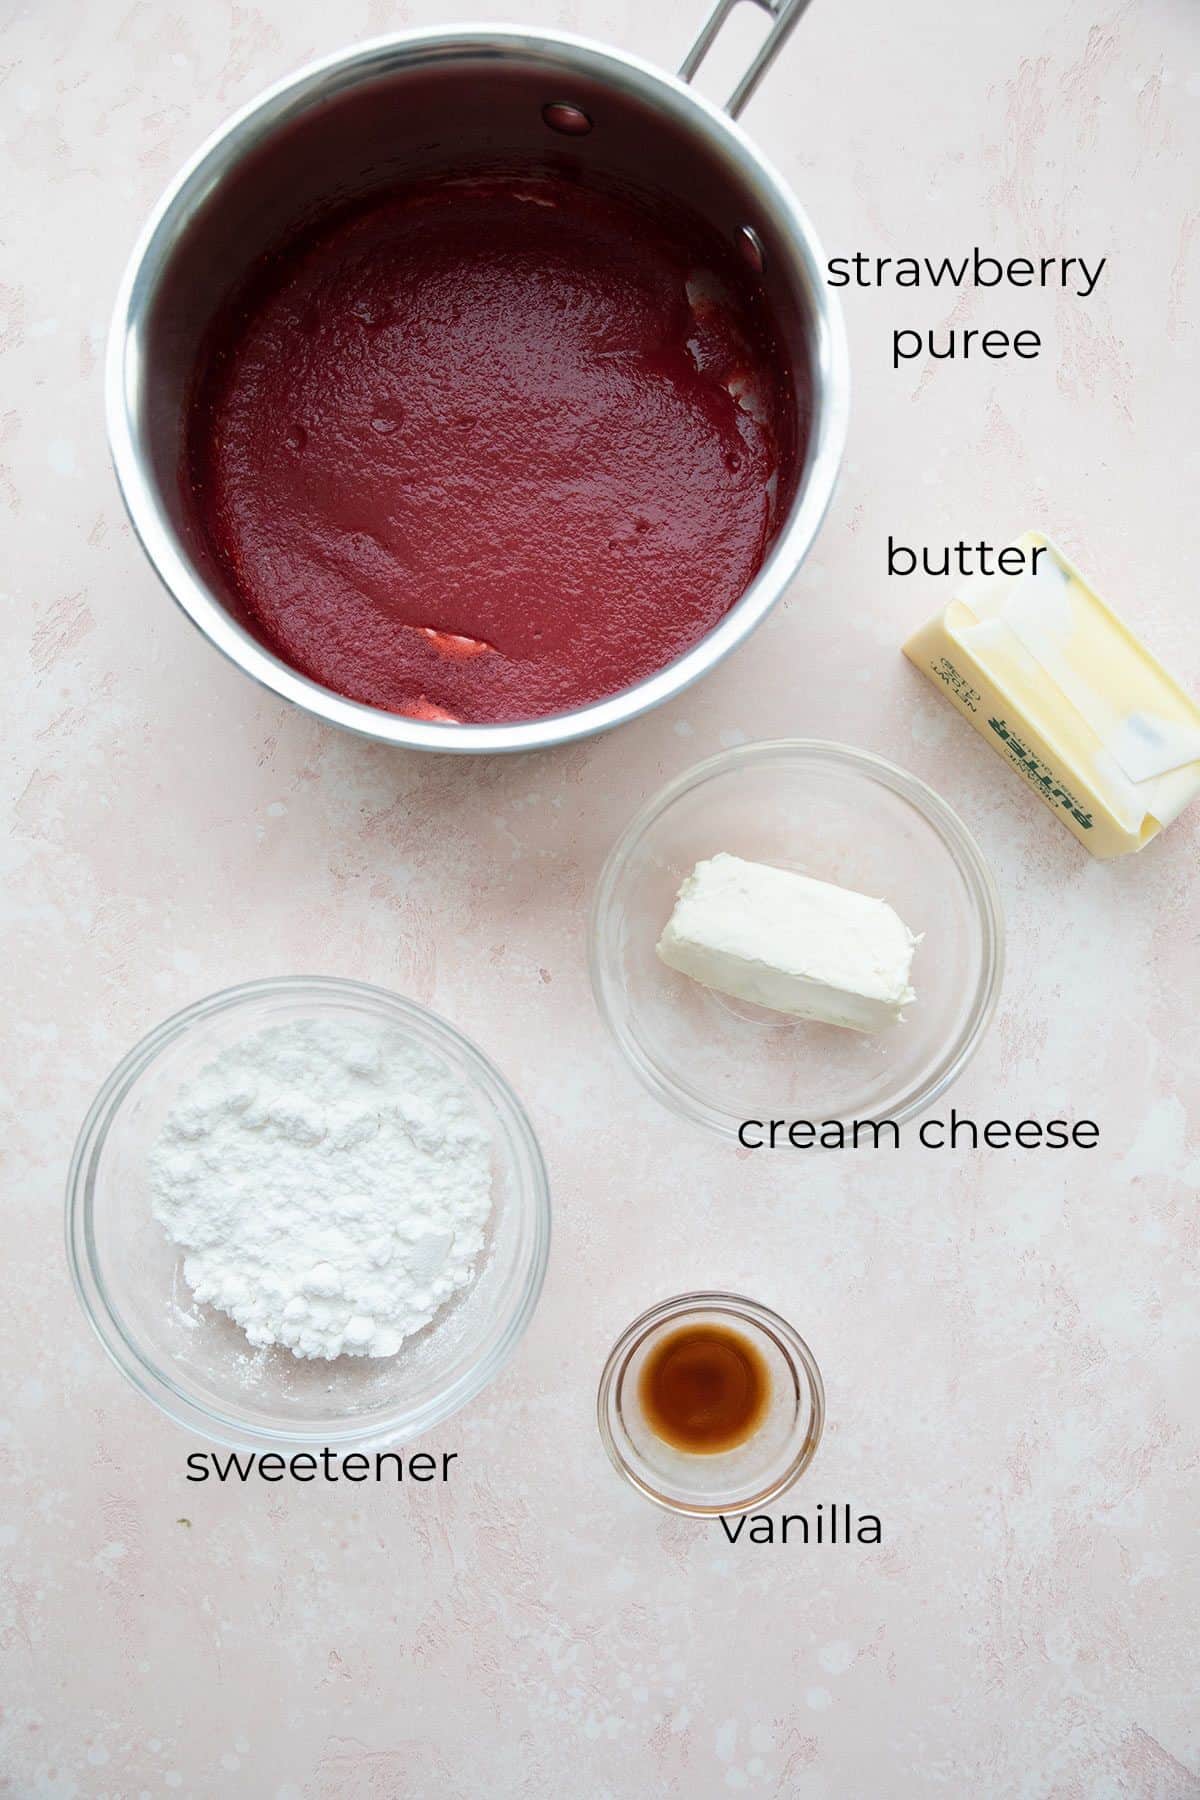 Top down image of ingredients needed for sugar-free strawberry frosting.